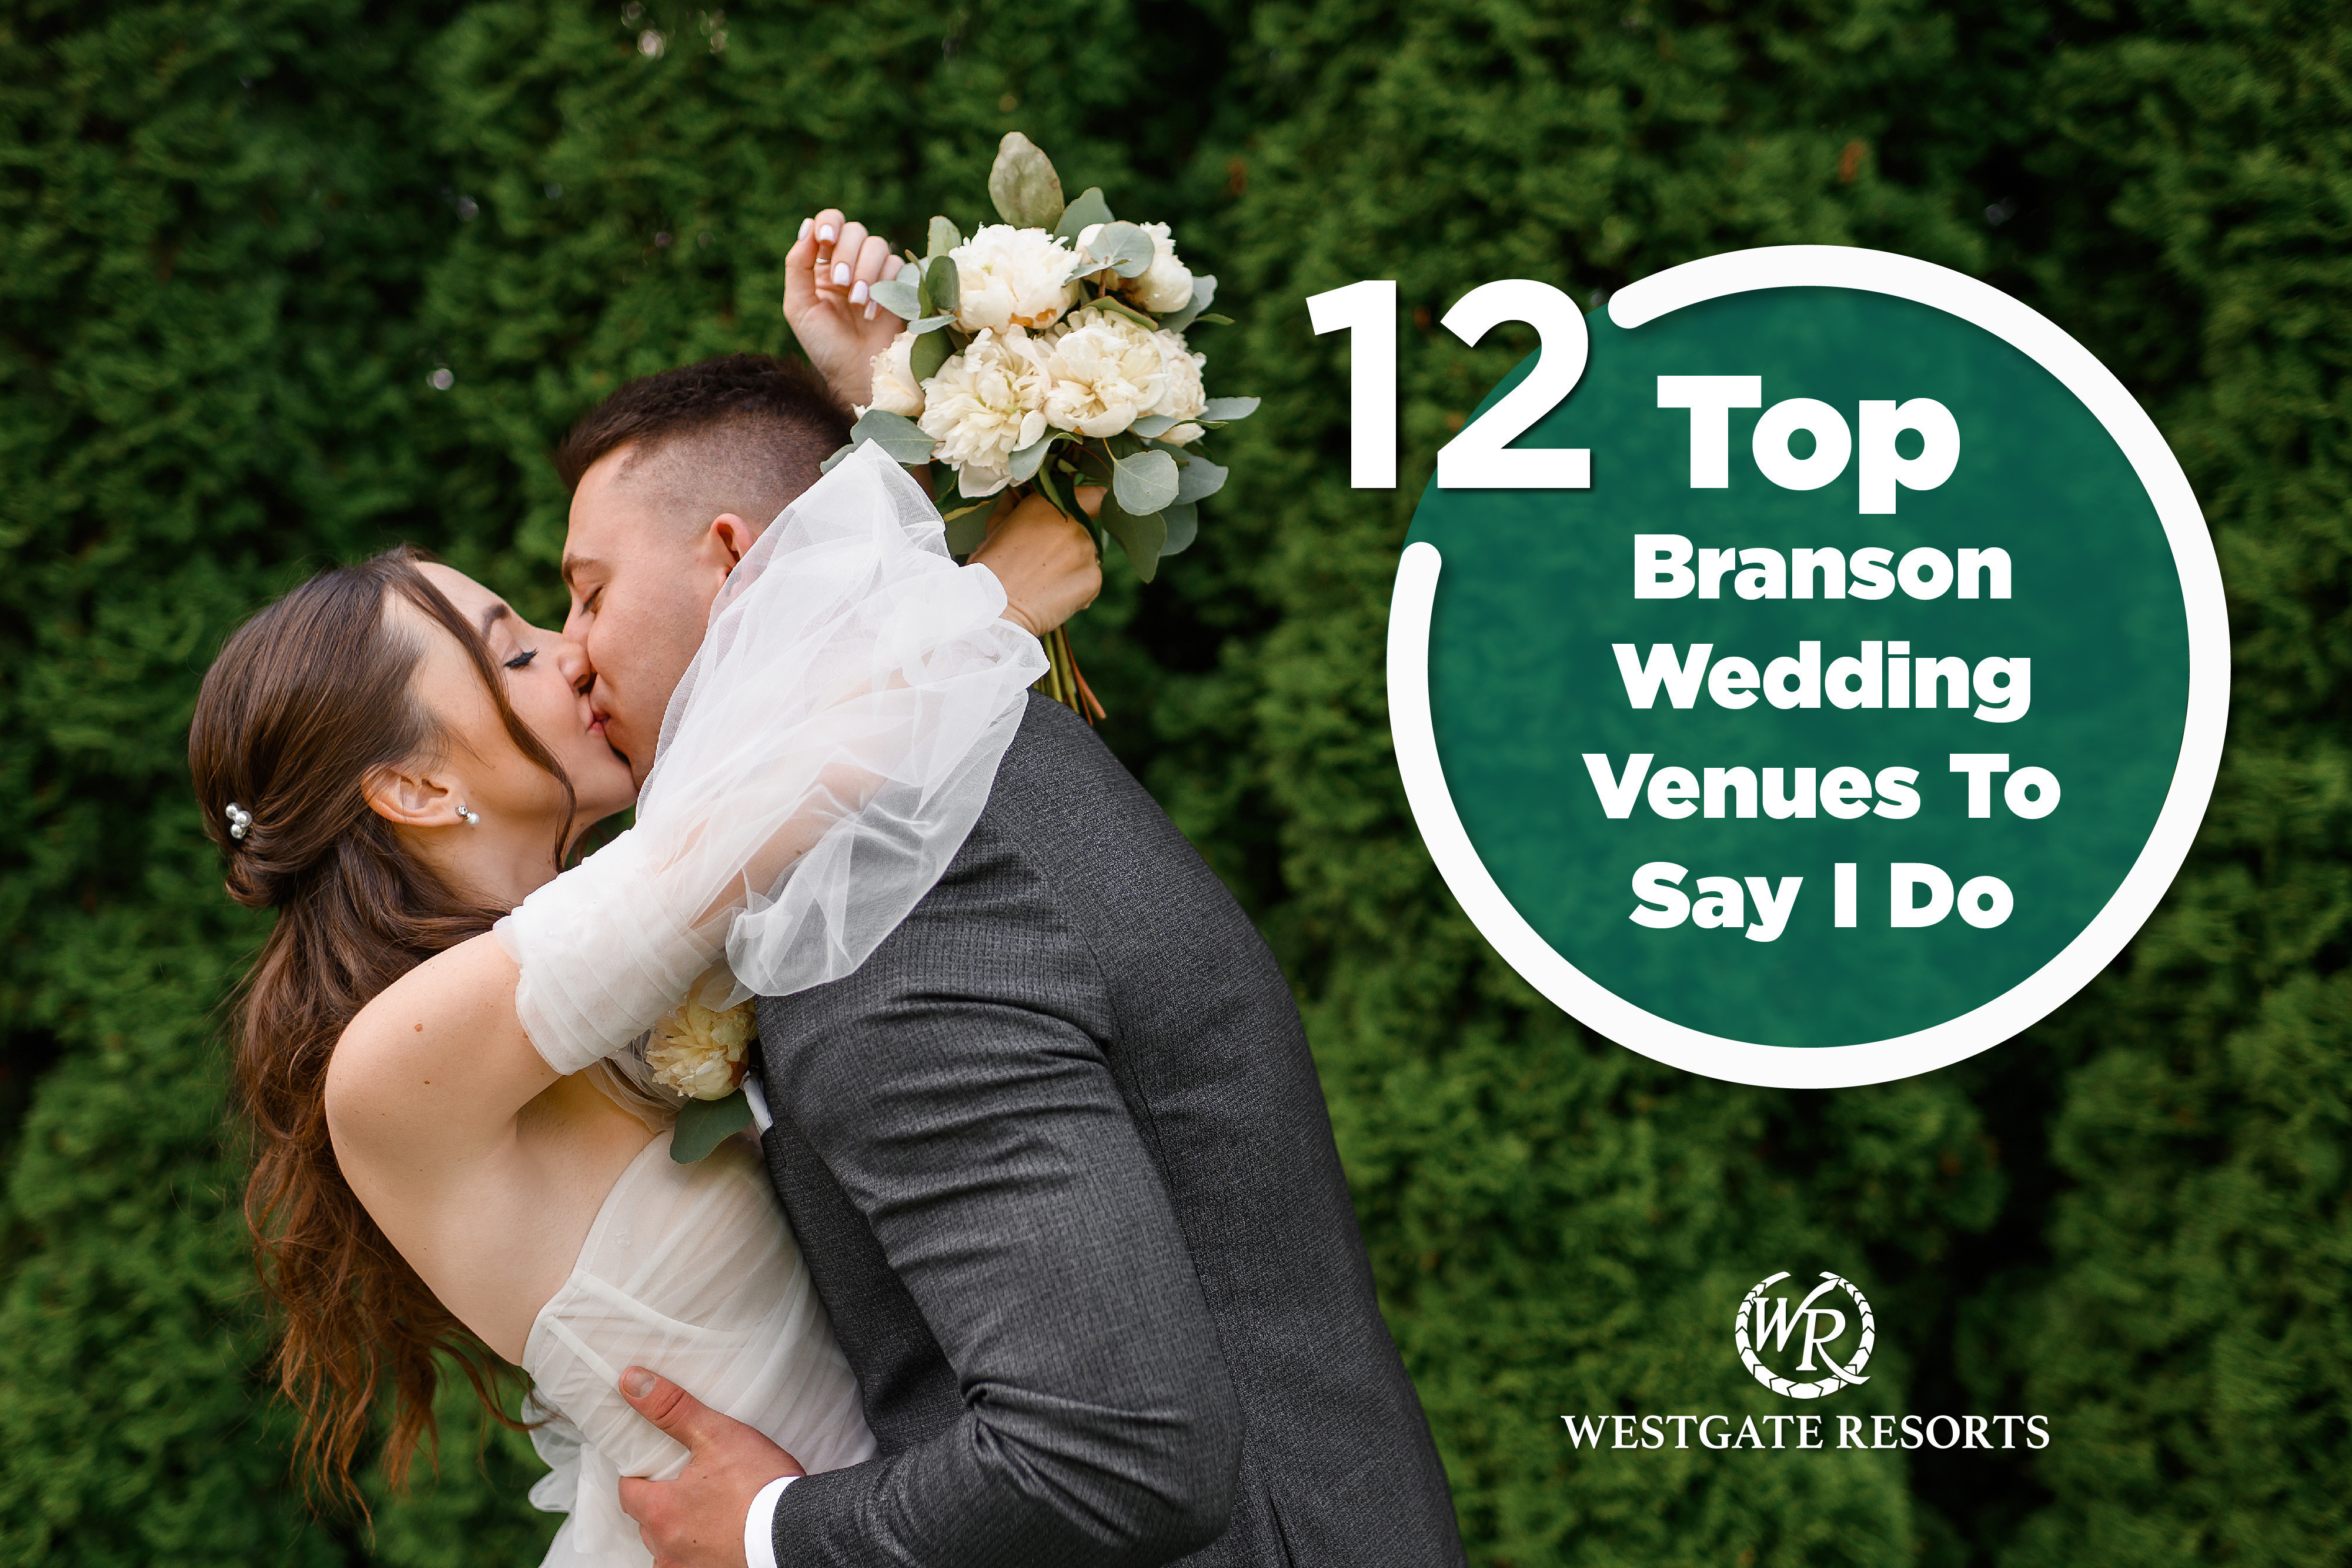 12 Top Branson Wedding Venues to Say I Do